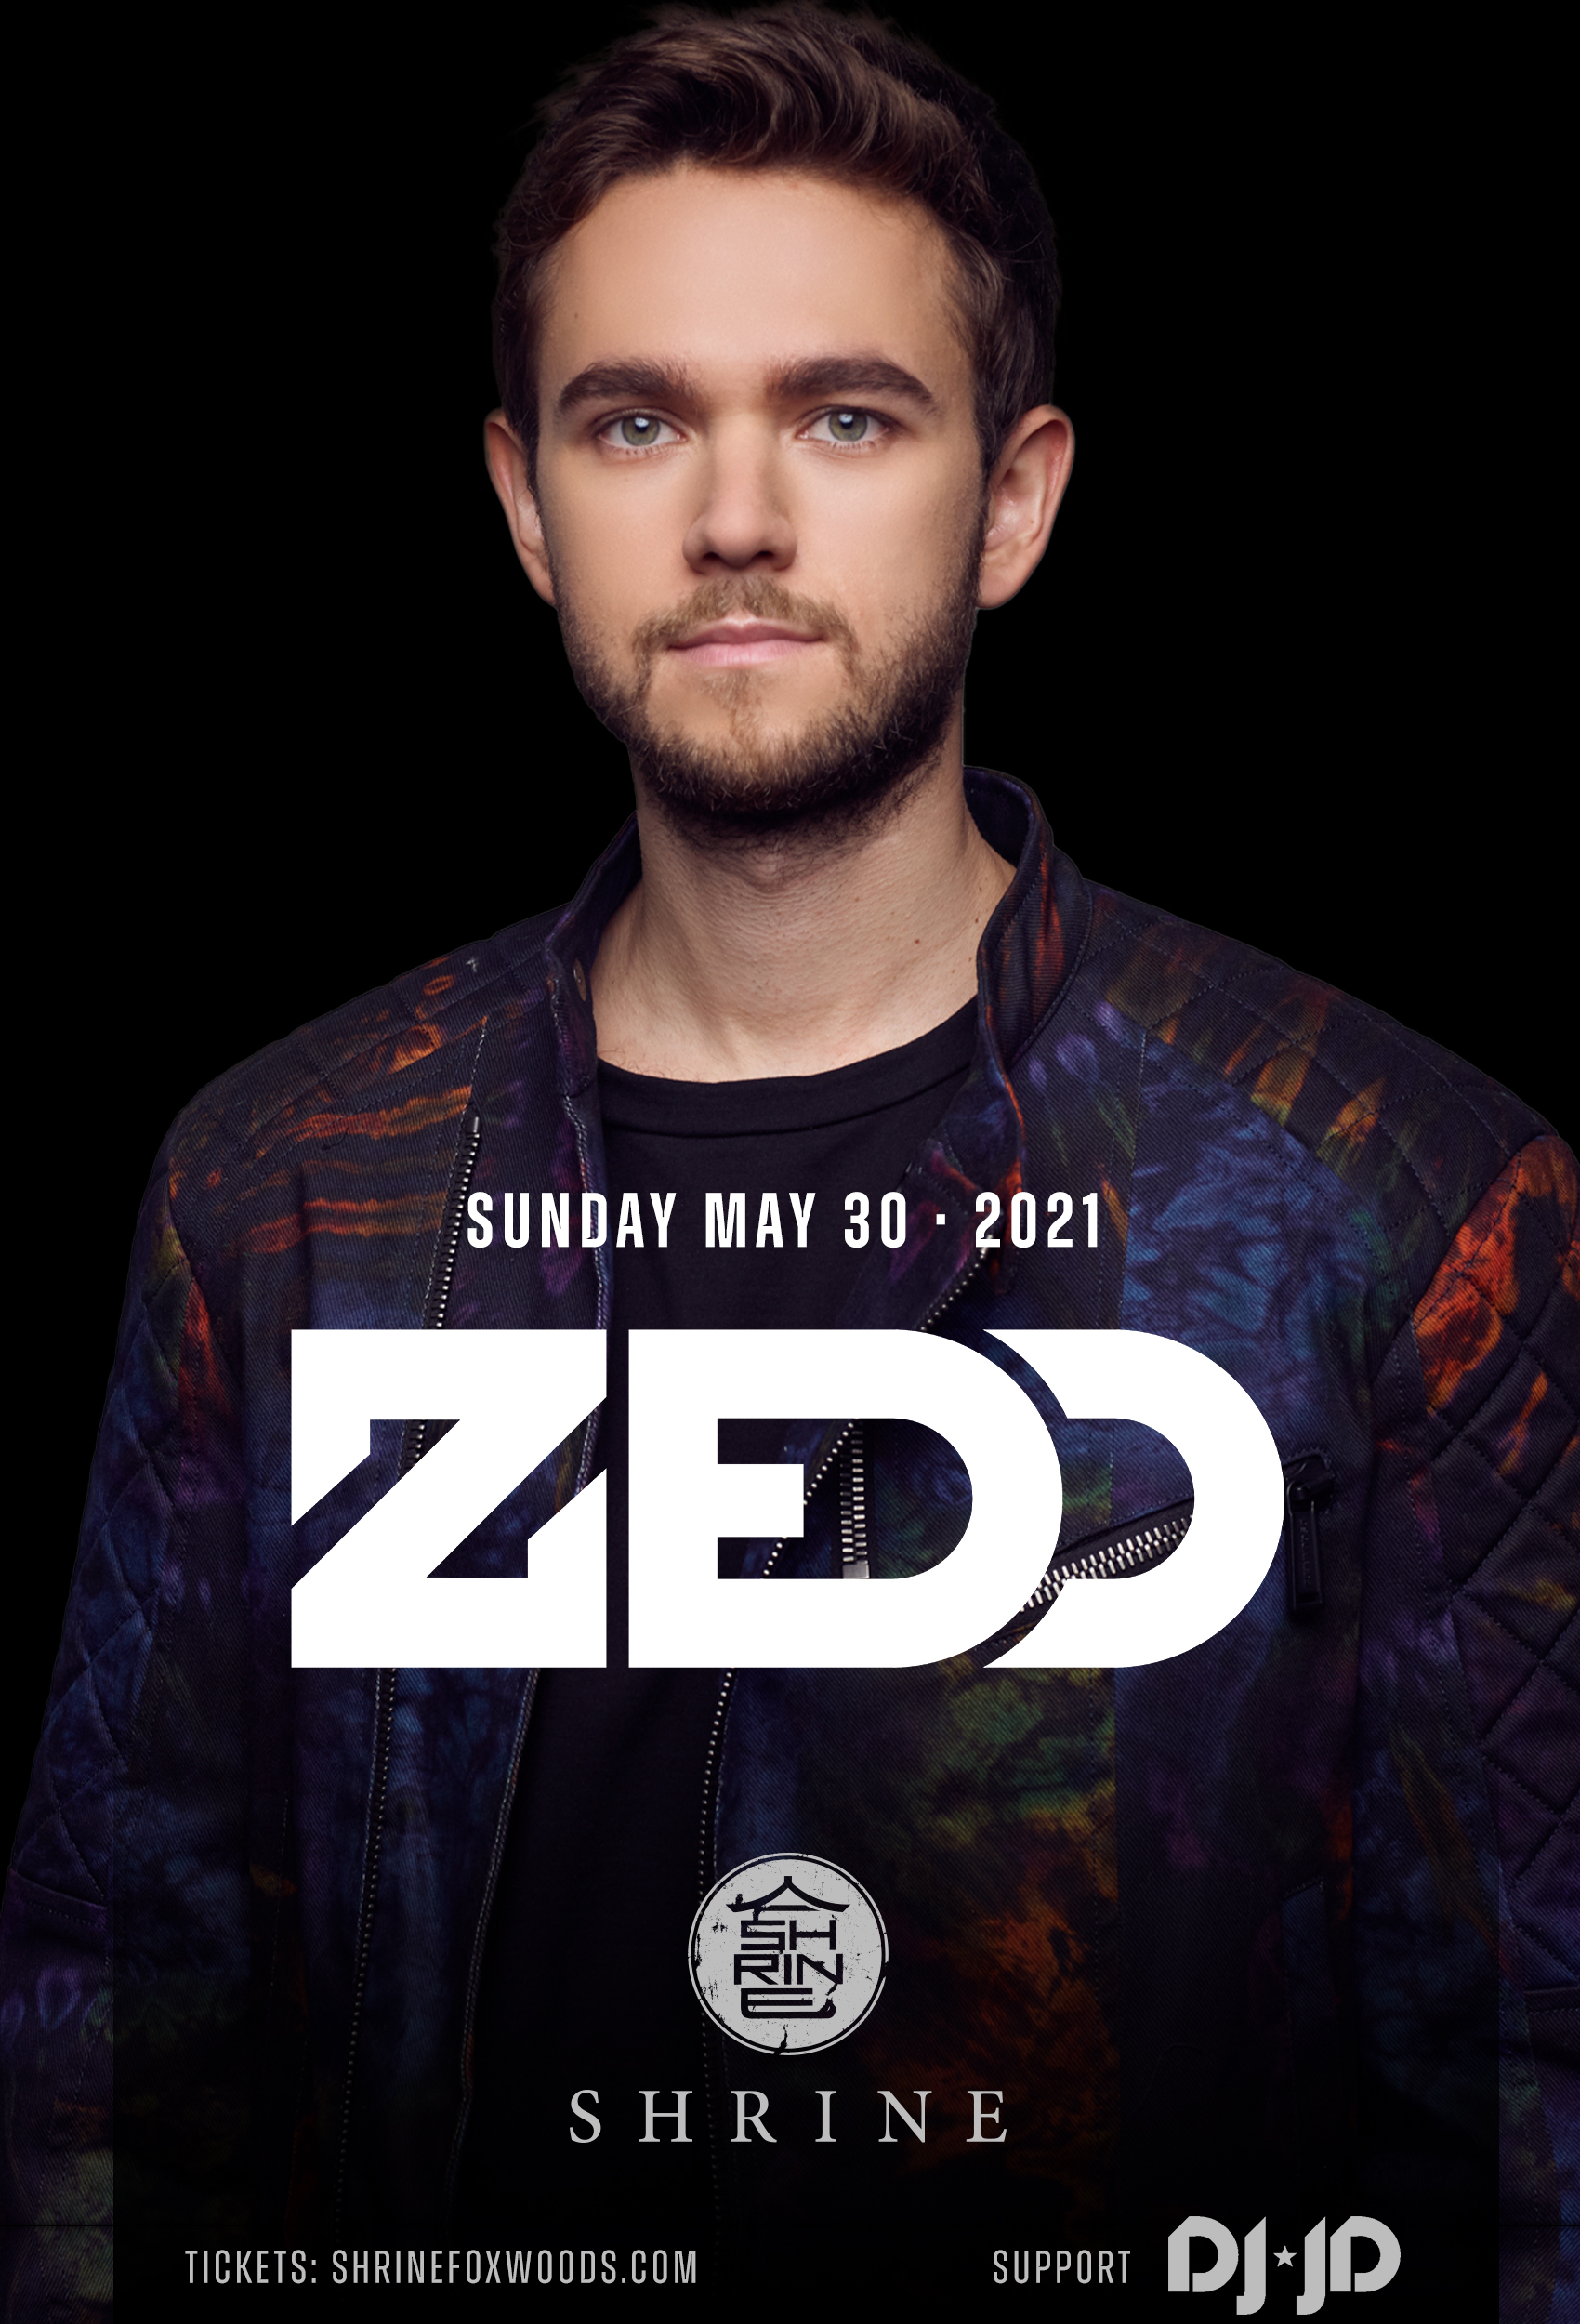 Tablelist Buy Tickets And Tables To Zedd 5 30 21 Memorialdayweekend At Shrine Foxwoods